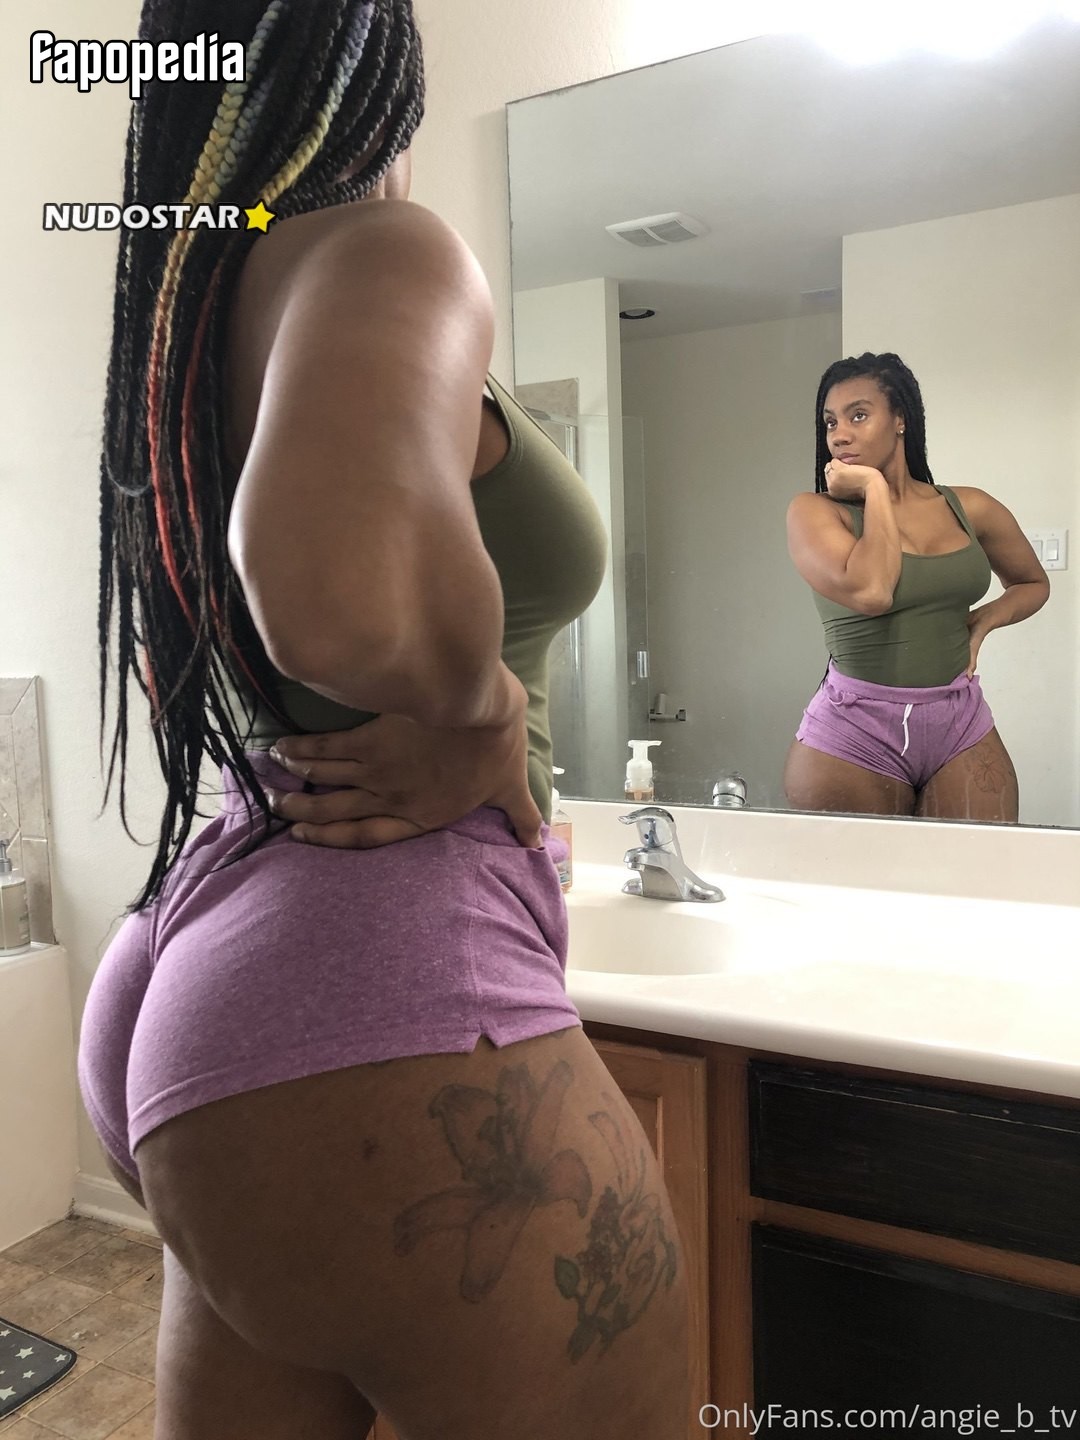 Angie b onlyfans